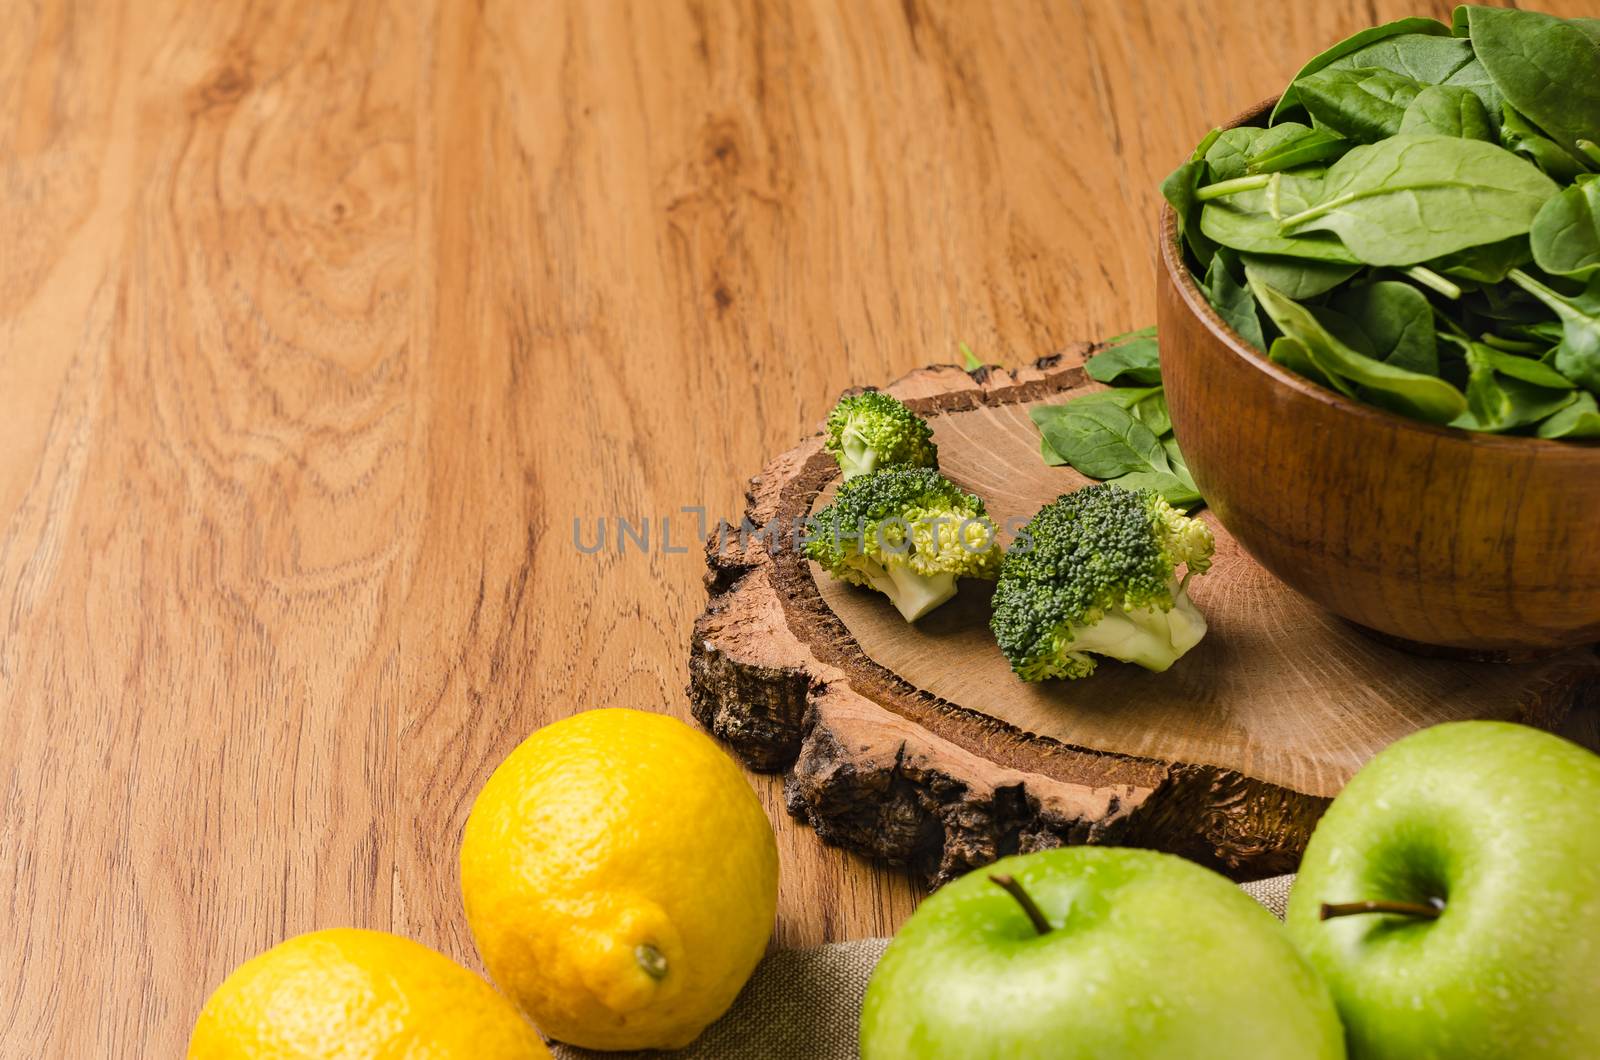 Spring spinach leaves in the bowl, broccoli, lemons and apples on wooden table background